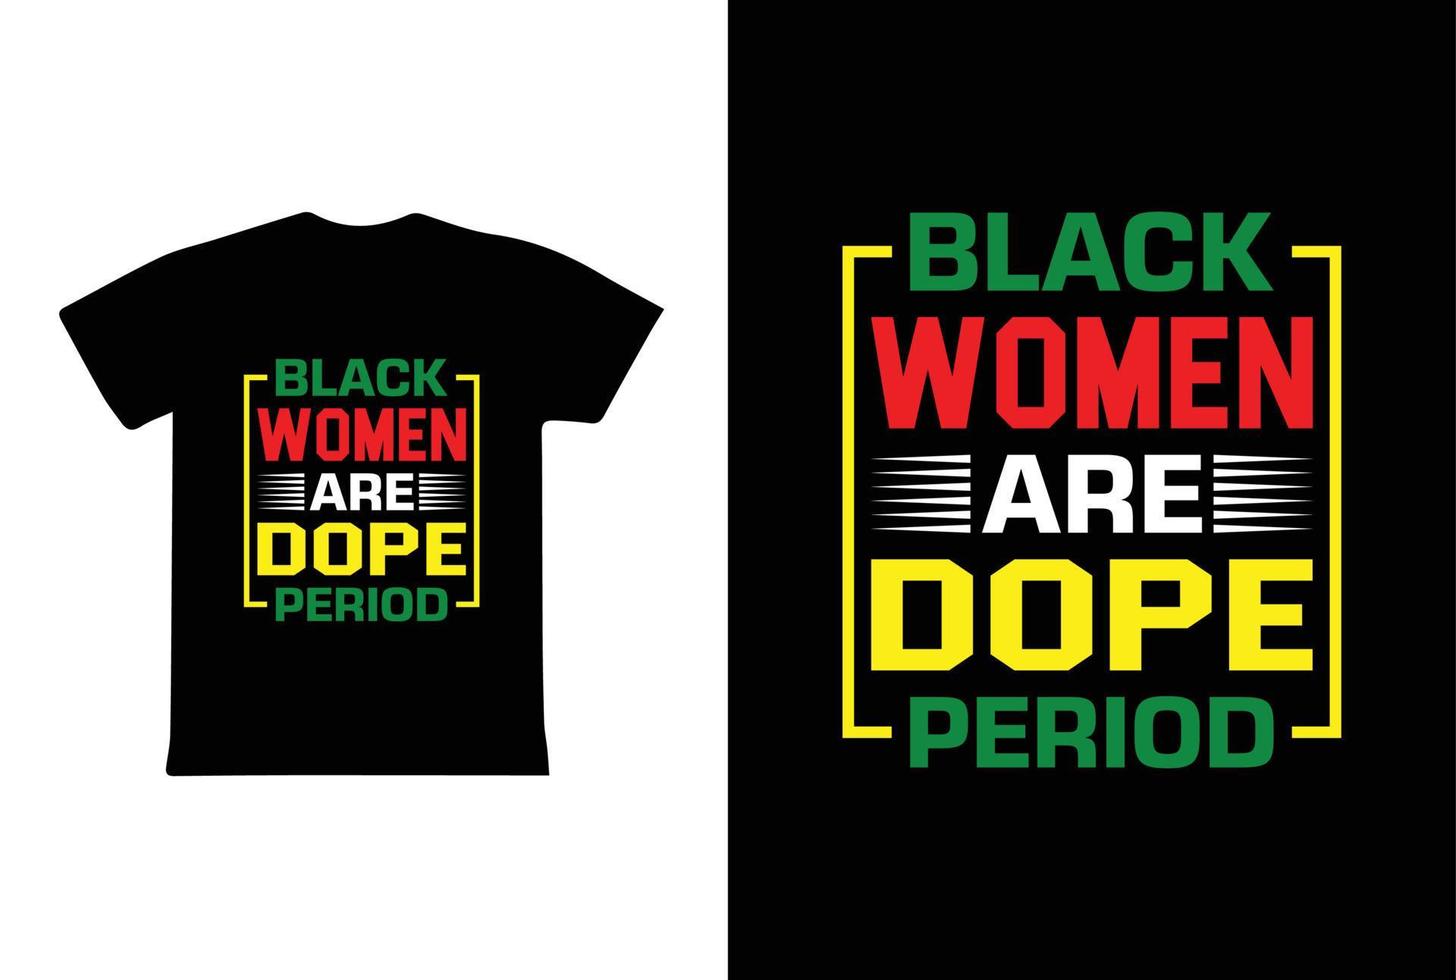 Black Women Are Dope Period. Women's day 8 march t-shirt design template vector